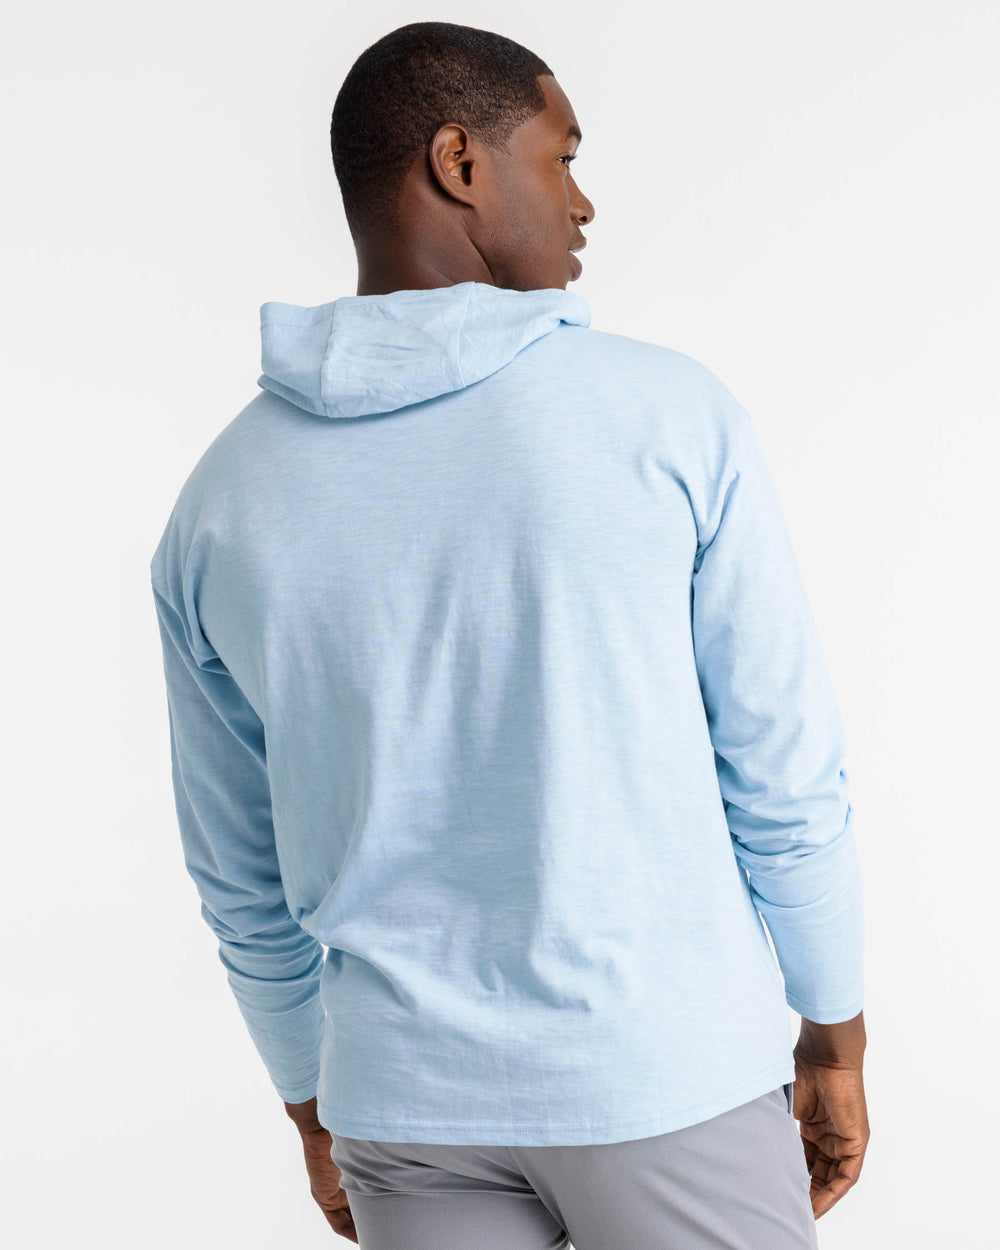 The back view of the Southern Tide Andreas Sun Farer Hoodie by Southern Tide - Rain Water